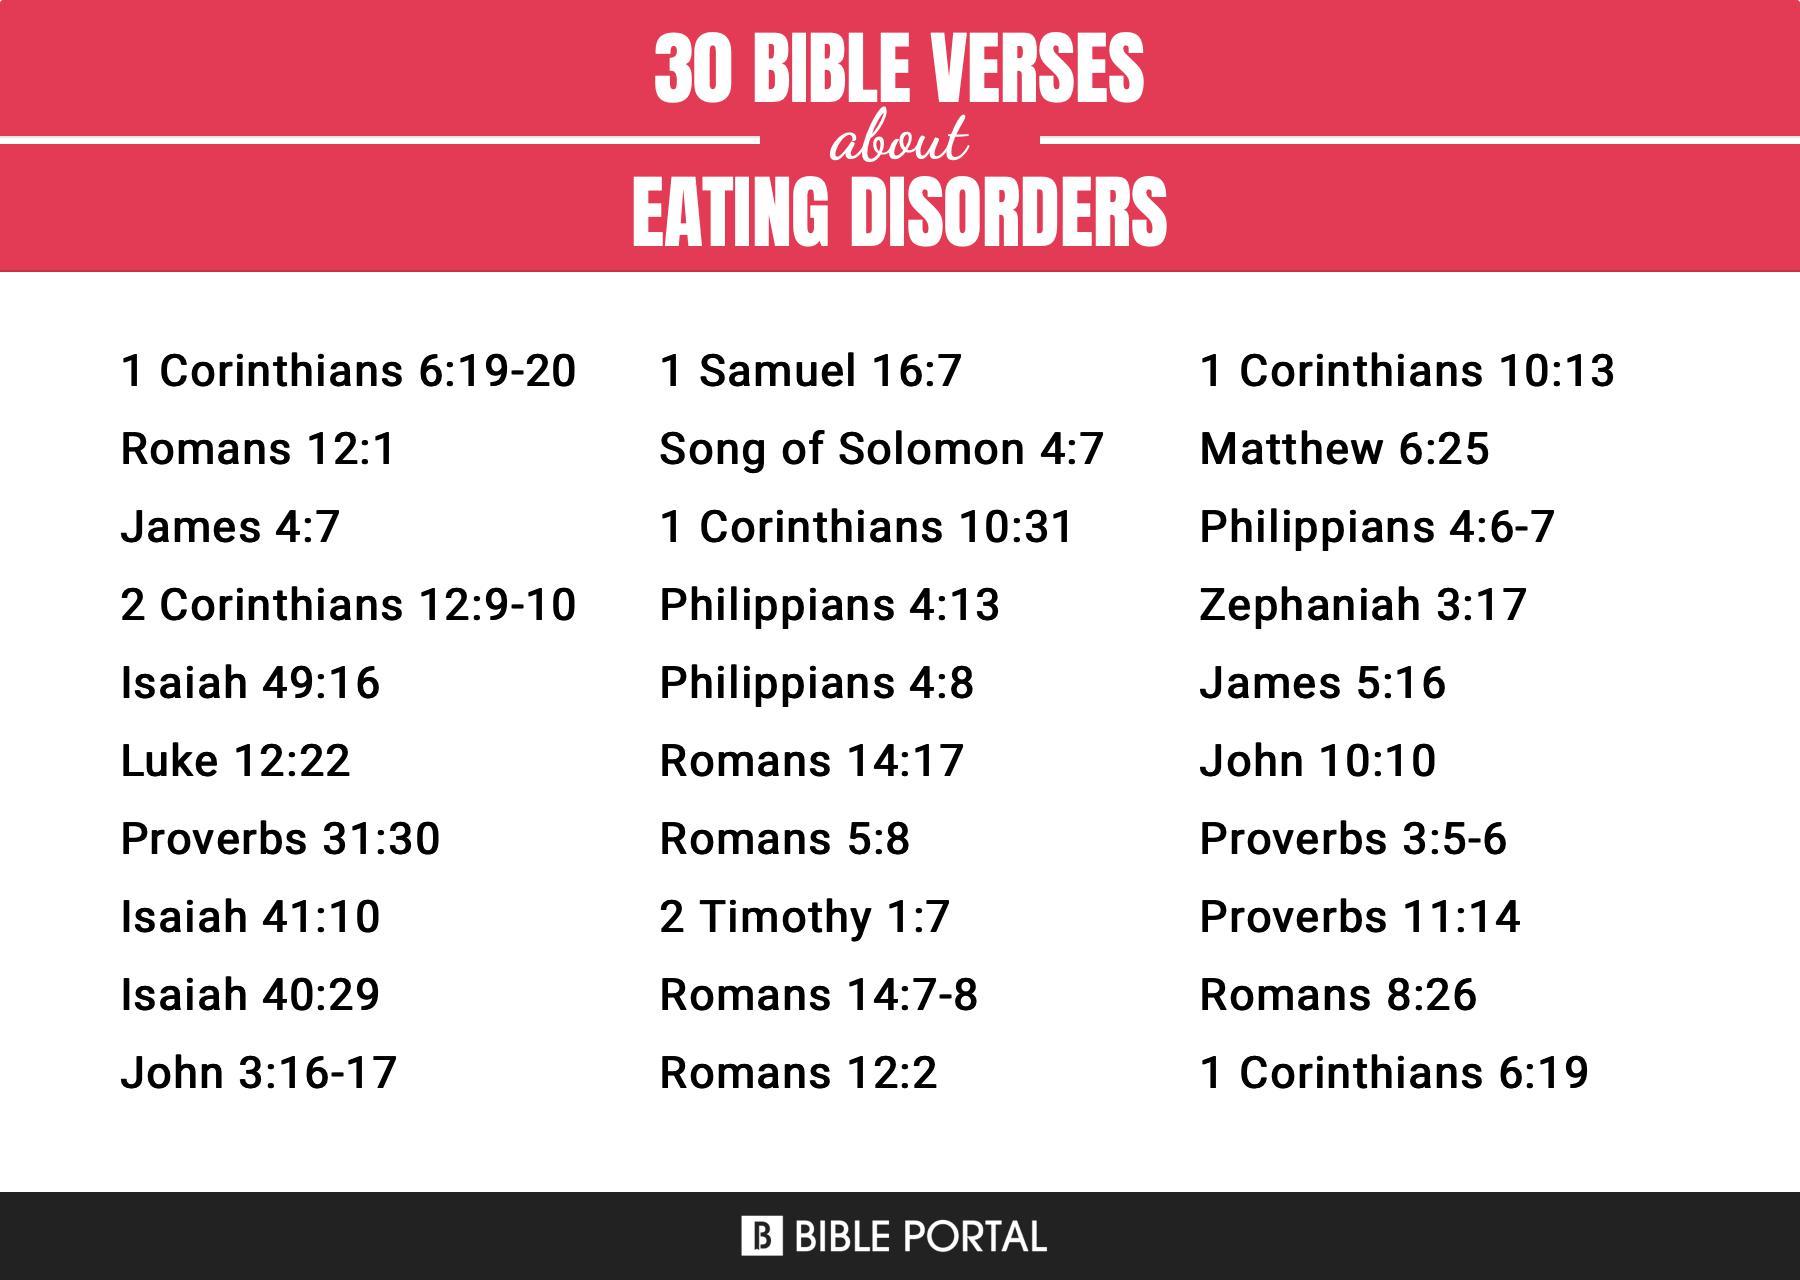 What Does the Bible Say about Eating Disorders?